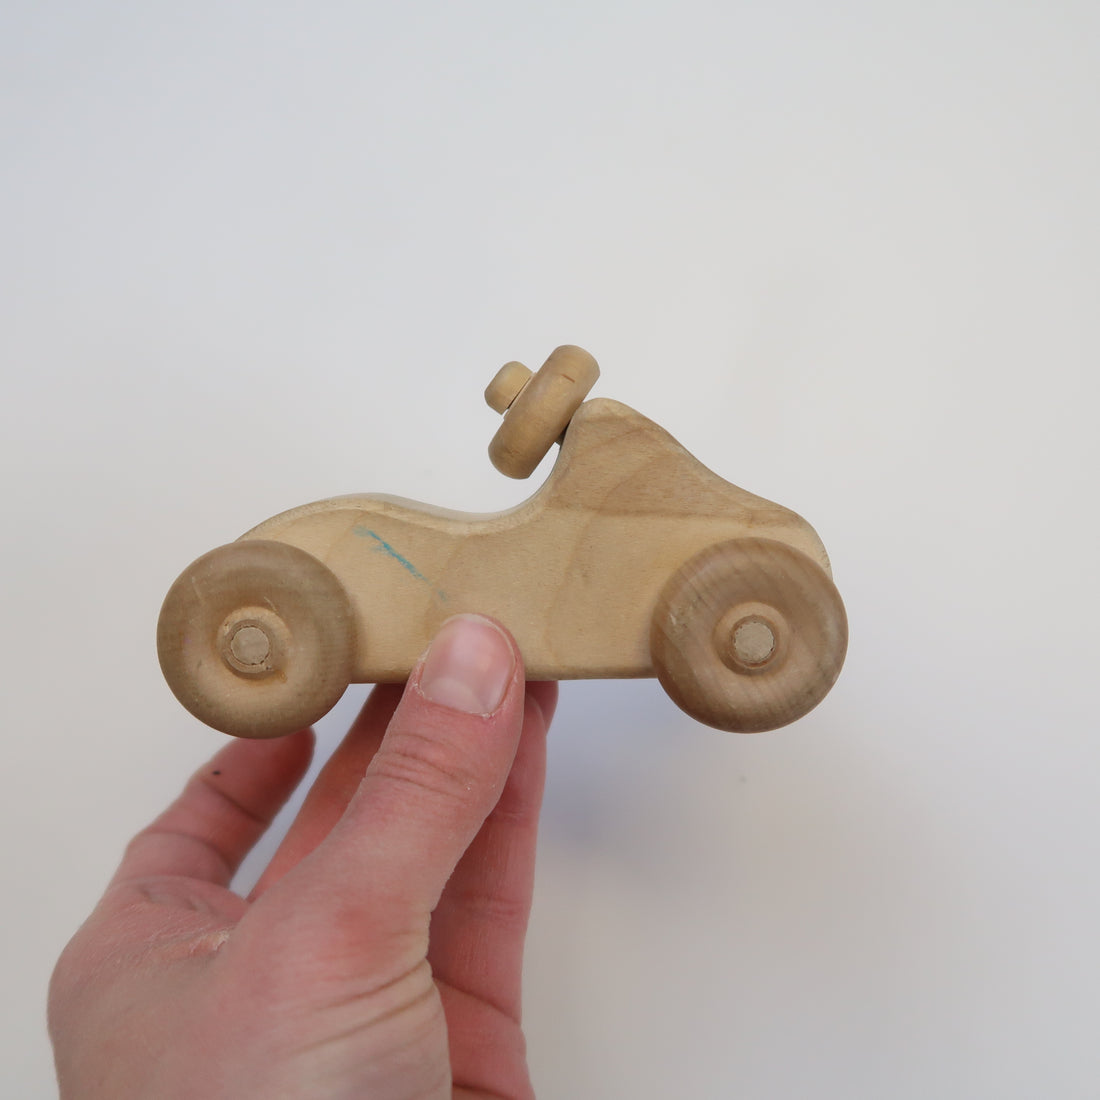 Unknown Brand - Small Wooden Car